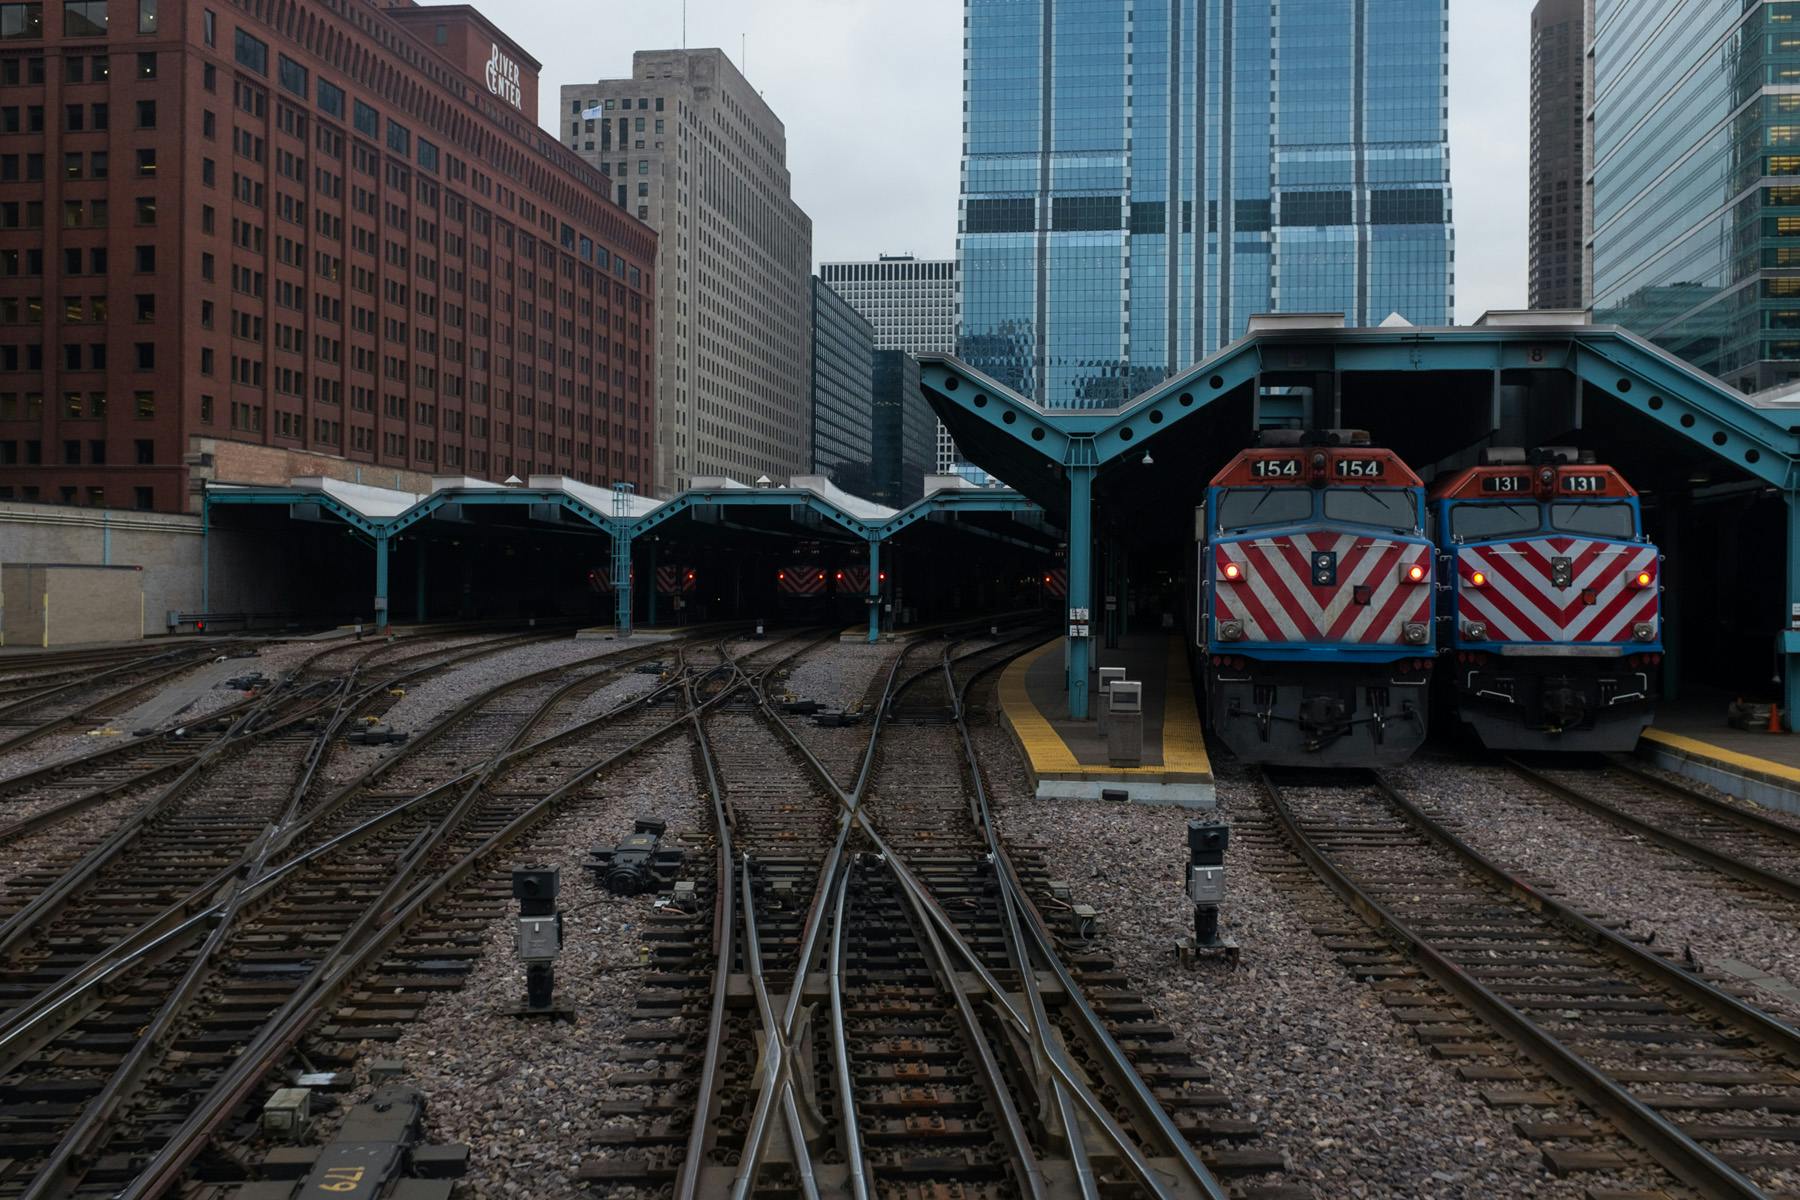 a shot of Ogilvie station with two trains sitting on the platforms, taken from the back of a train as it was leaving the station.